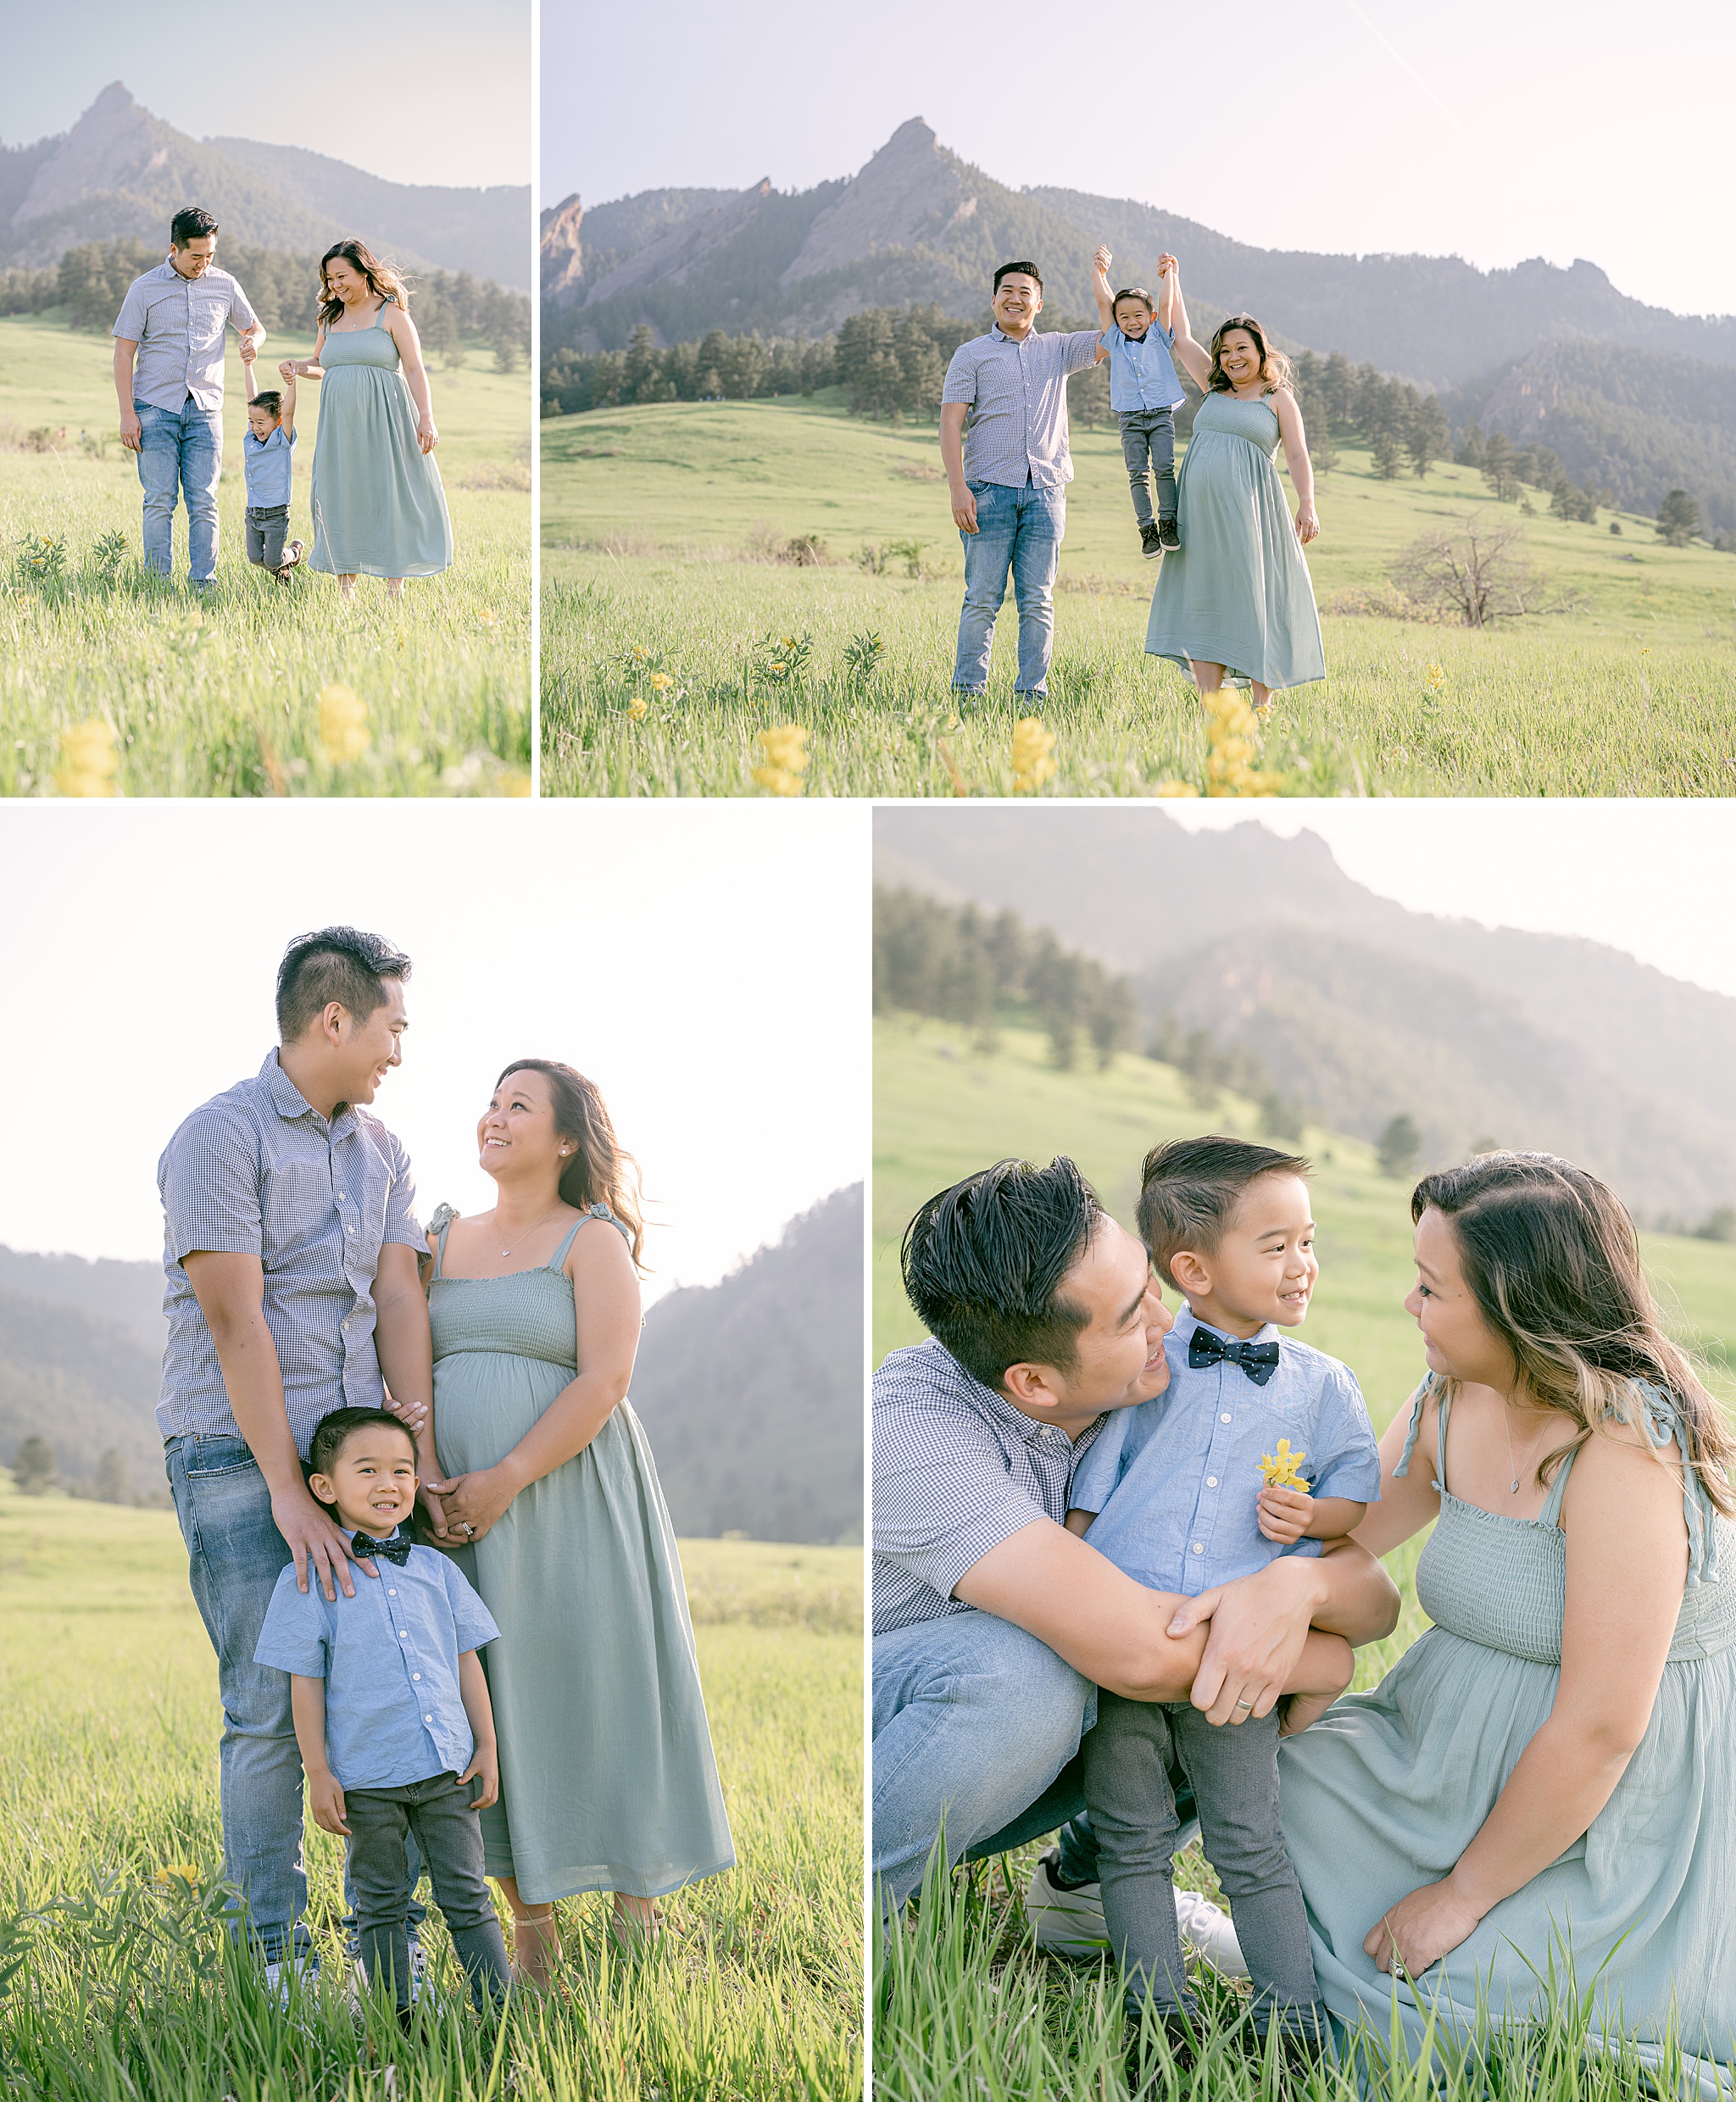 Family of three having fun during their spring portrait session in Chautauqua Park in Boulder, Colorado with mountains in the background